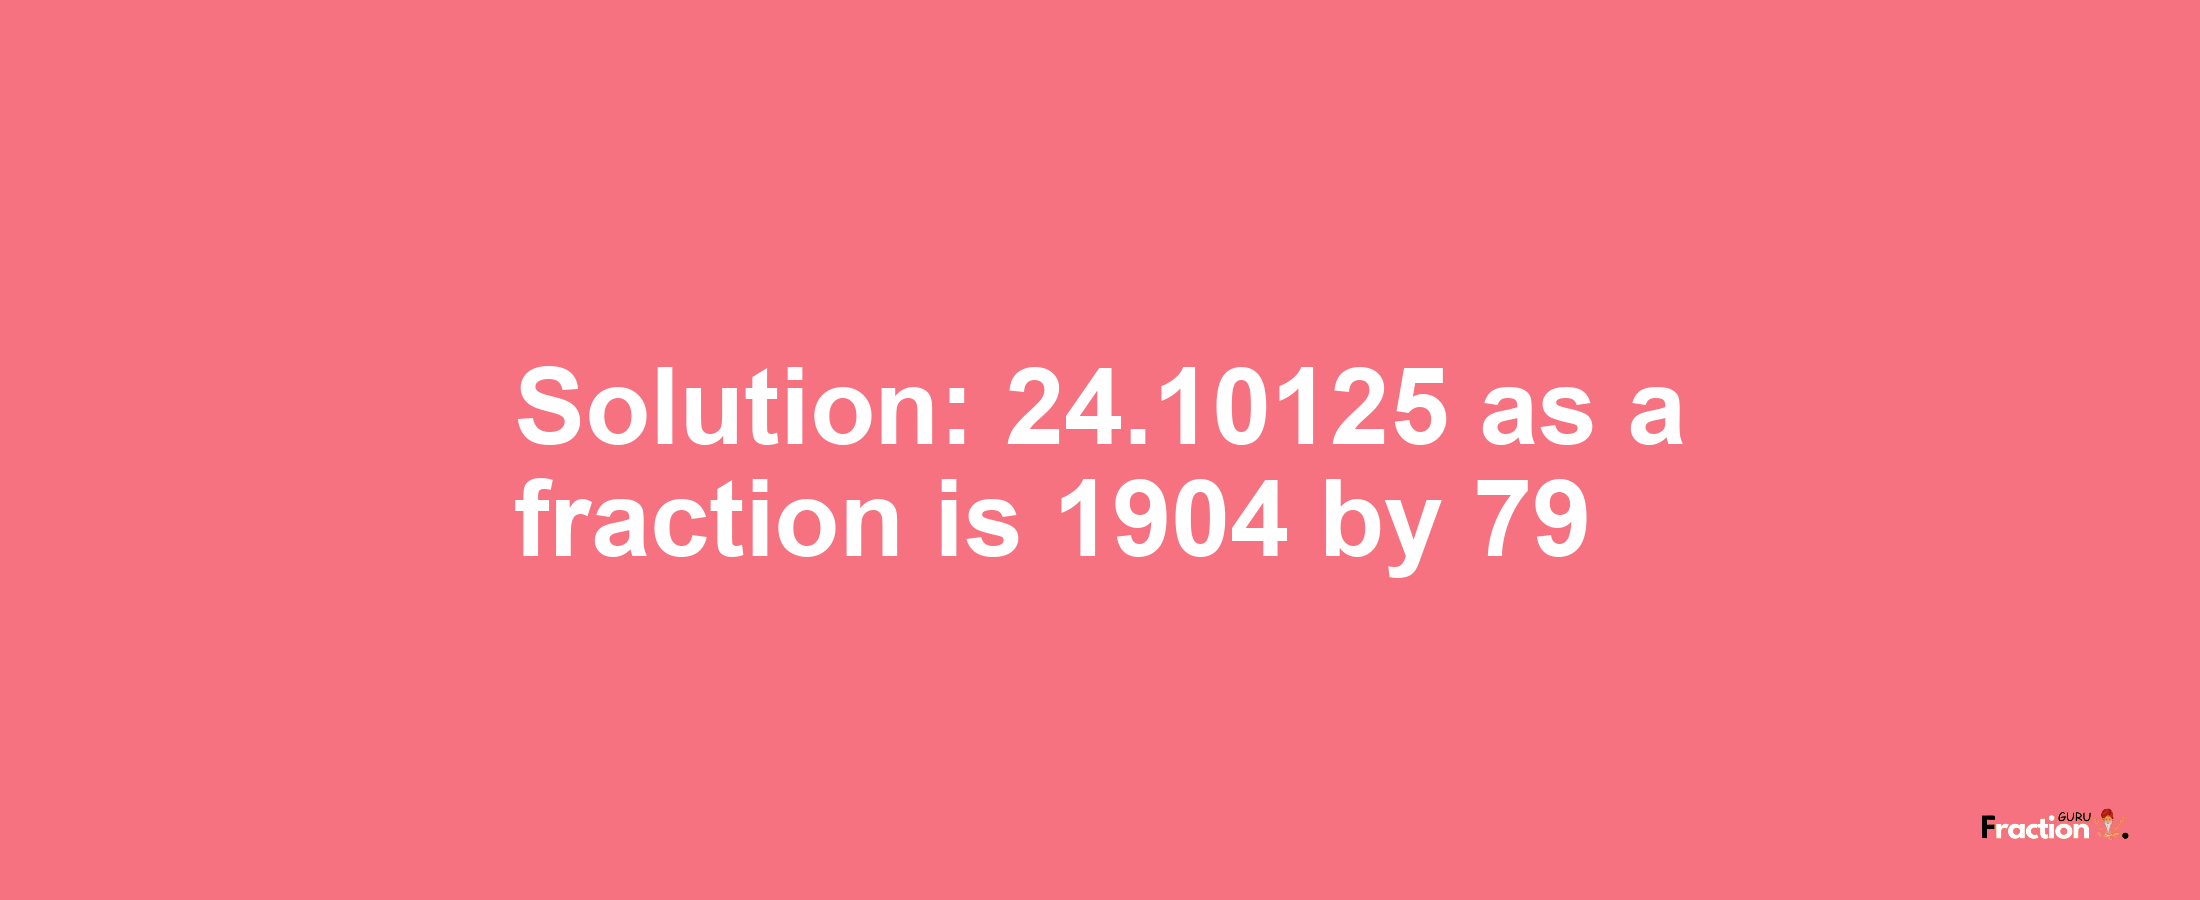 Solution:24.10125 as a fraction is 1904/79